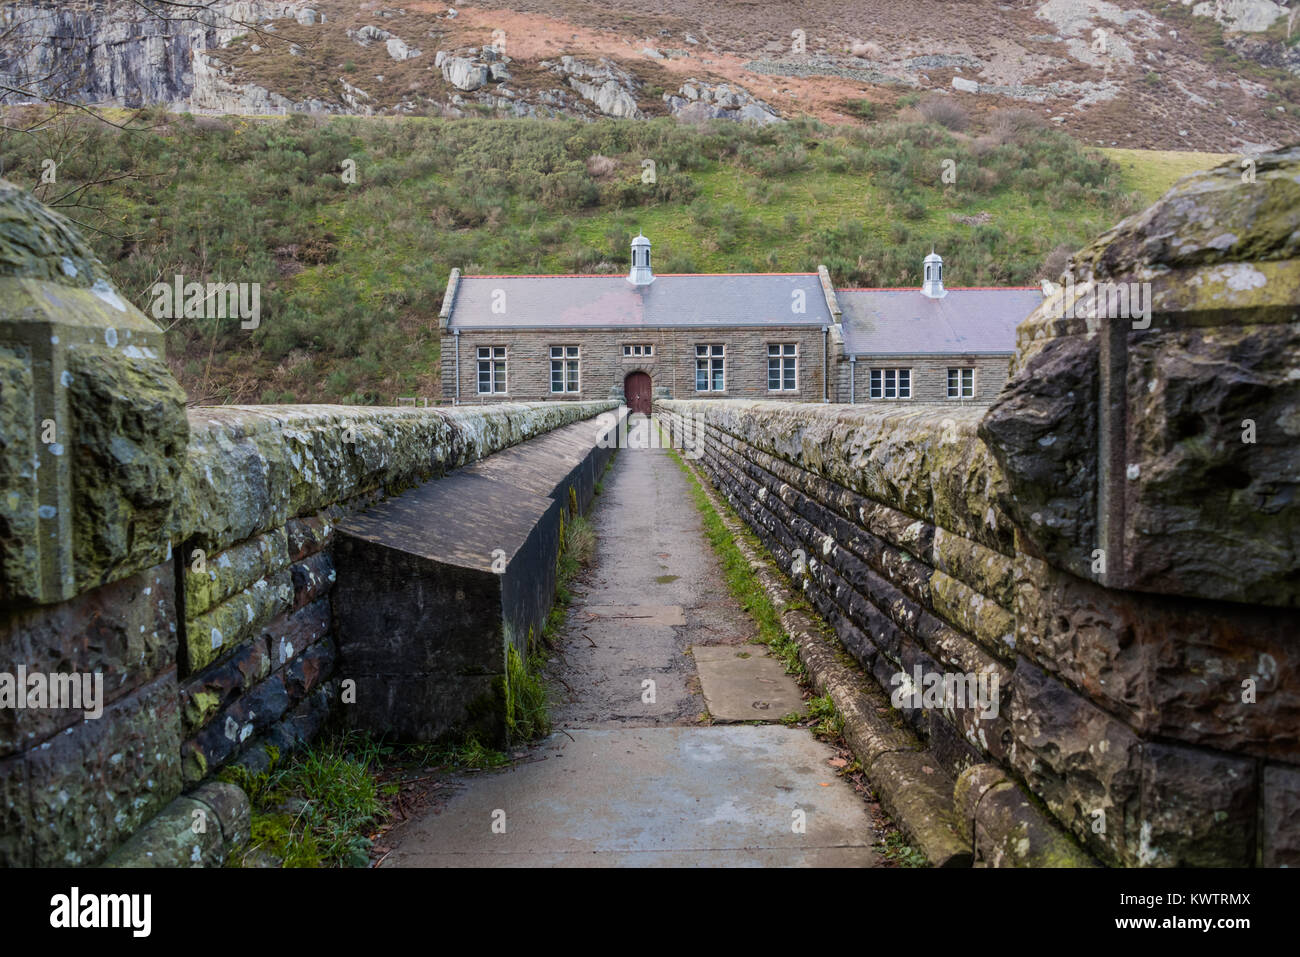 A footpath over a stone bridge leading to a pumping station set in the welsh hills Stock Photo